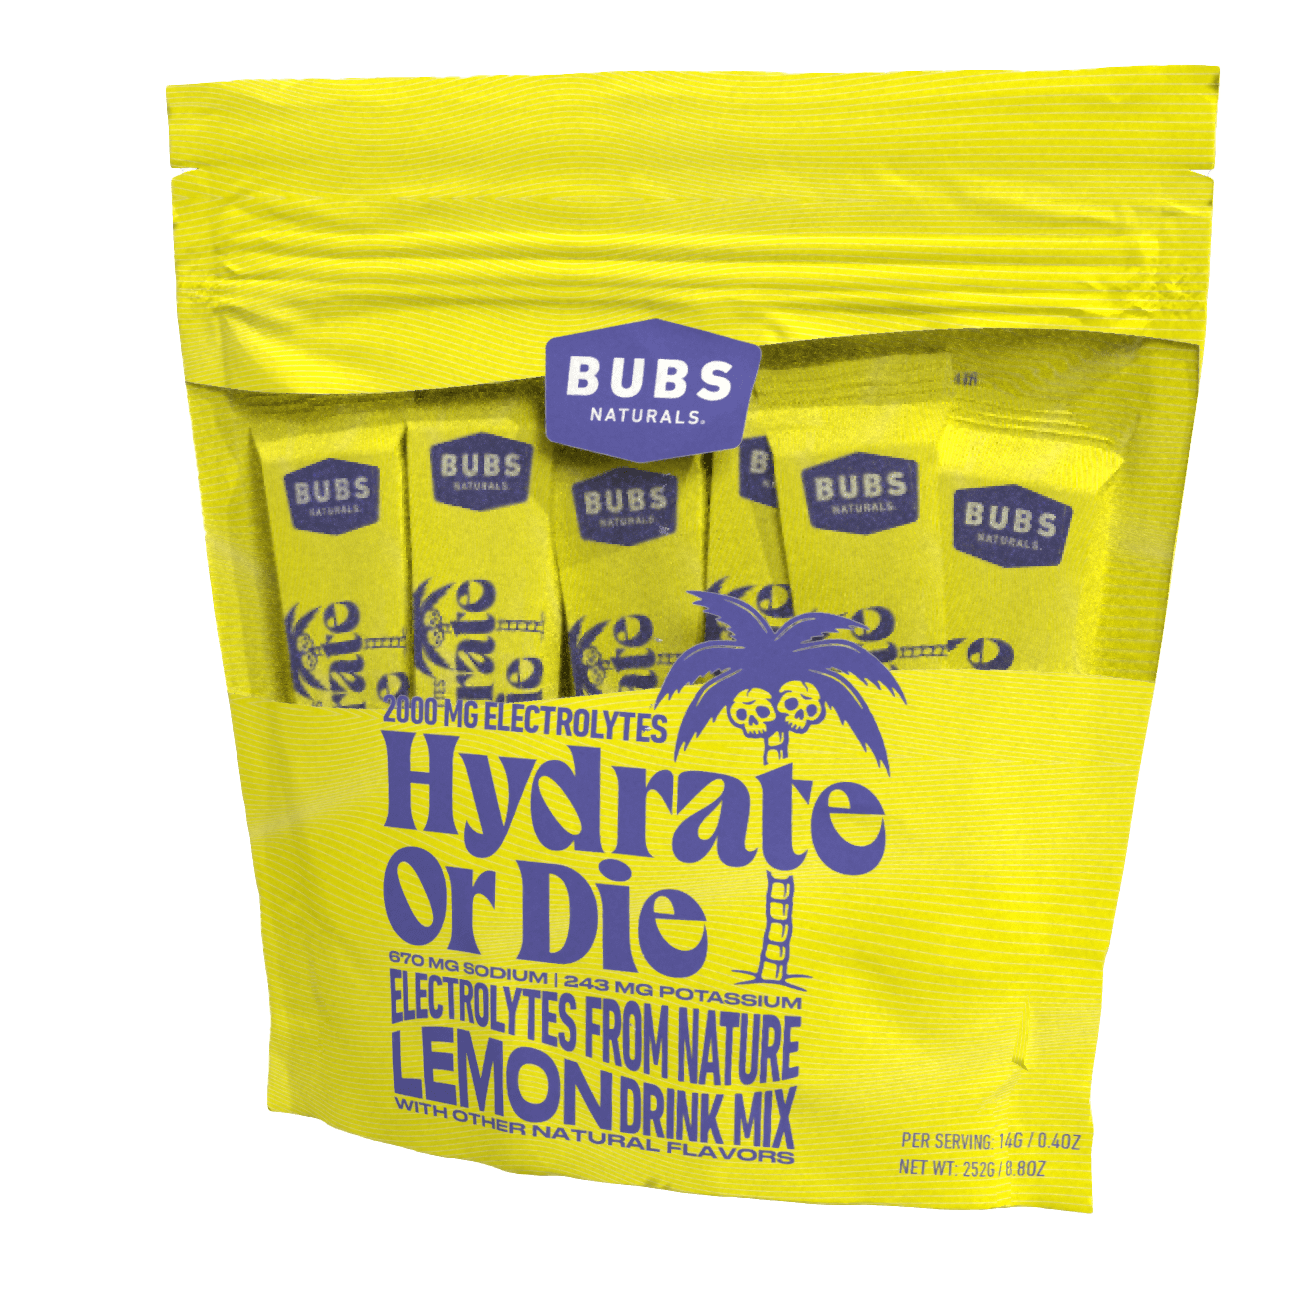 BUBS Naturals Lemon Hydrate or Die 2000mg Electrolyte Sticks, 18 Count Bag, Front Right